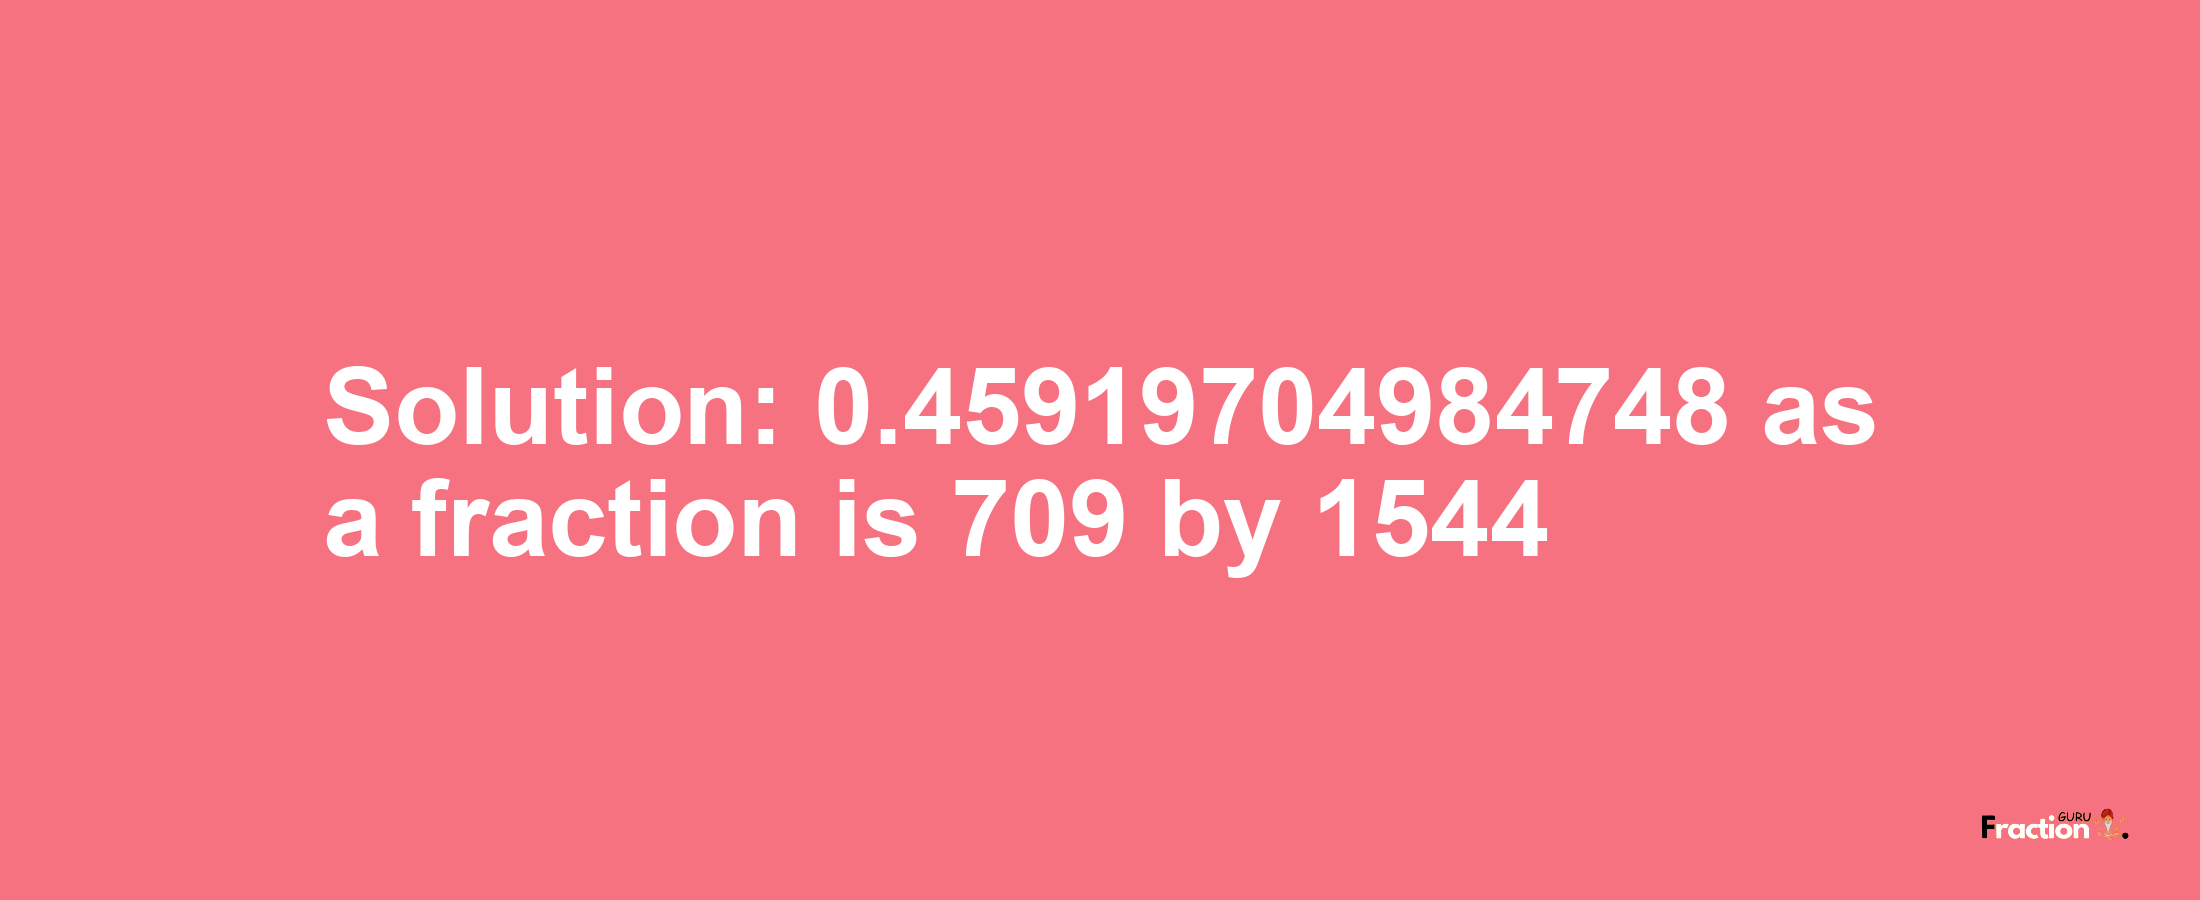 Solution:0.45919704984748 as a fraction is 709/1544